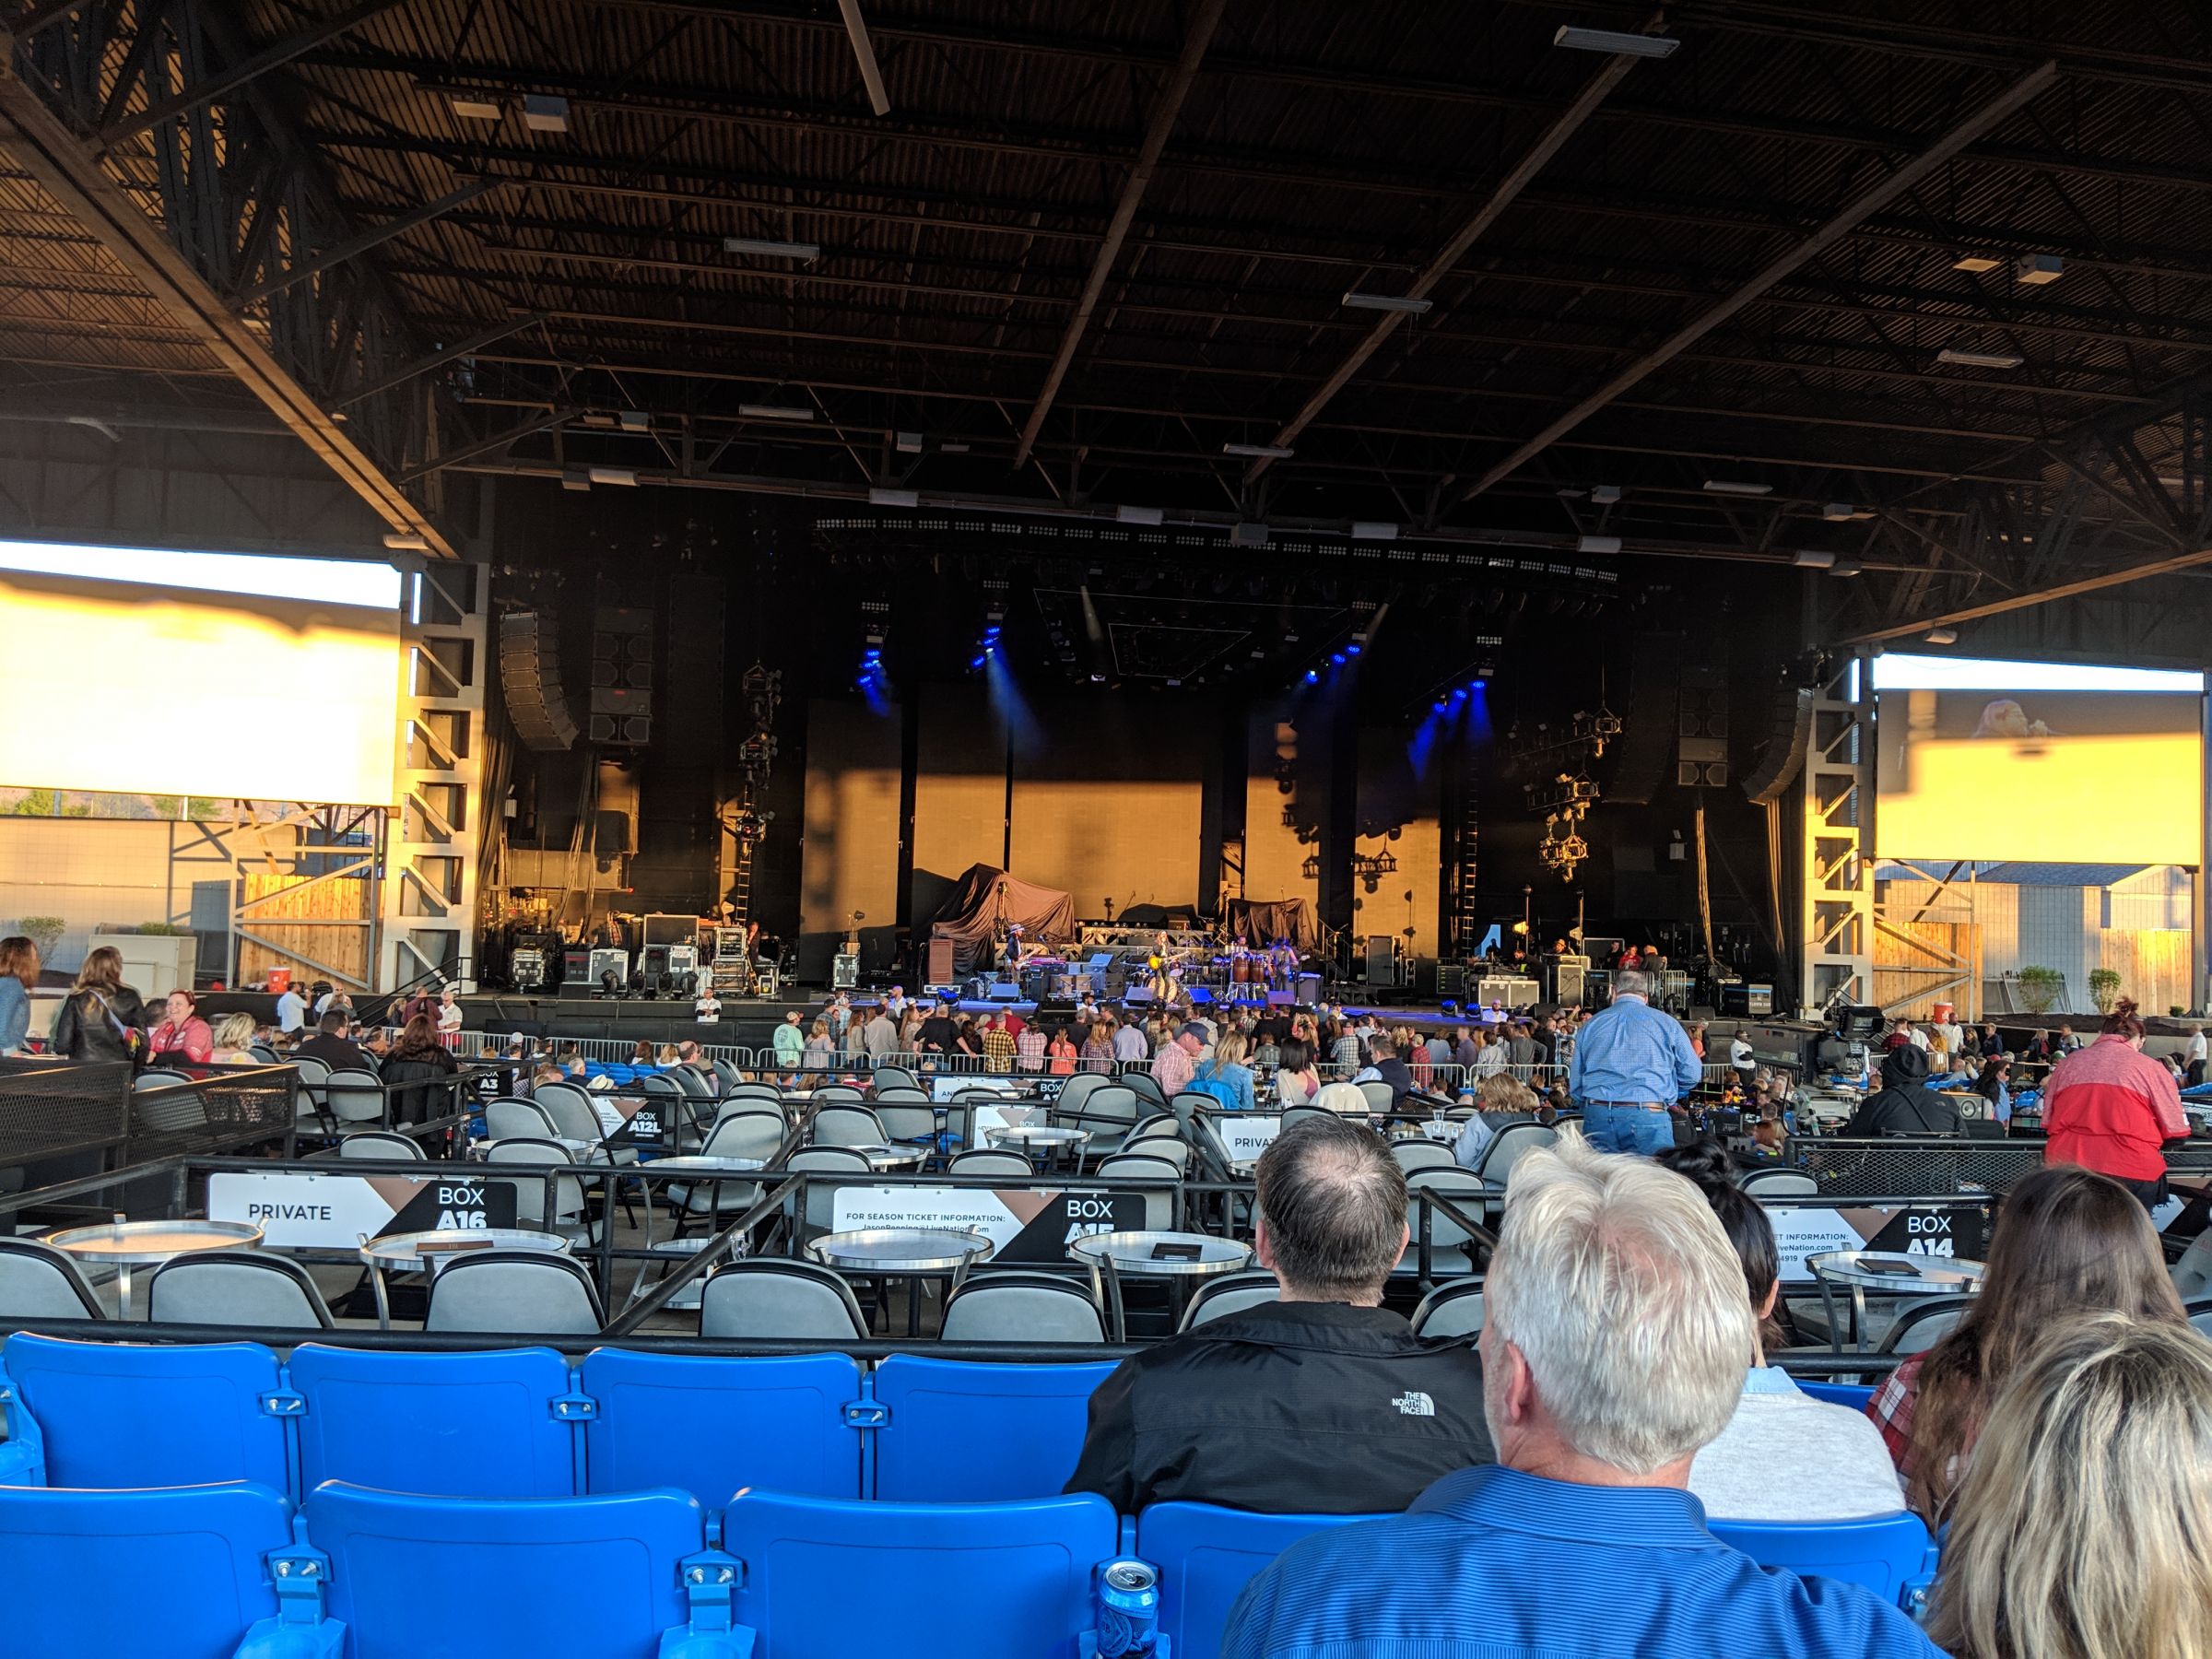 Hollywood casino amphitheatre concerts 2019 tickets